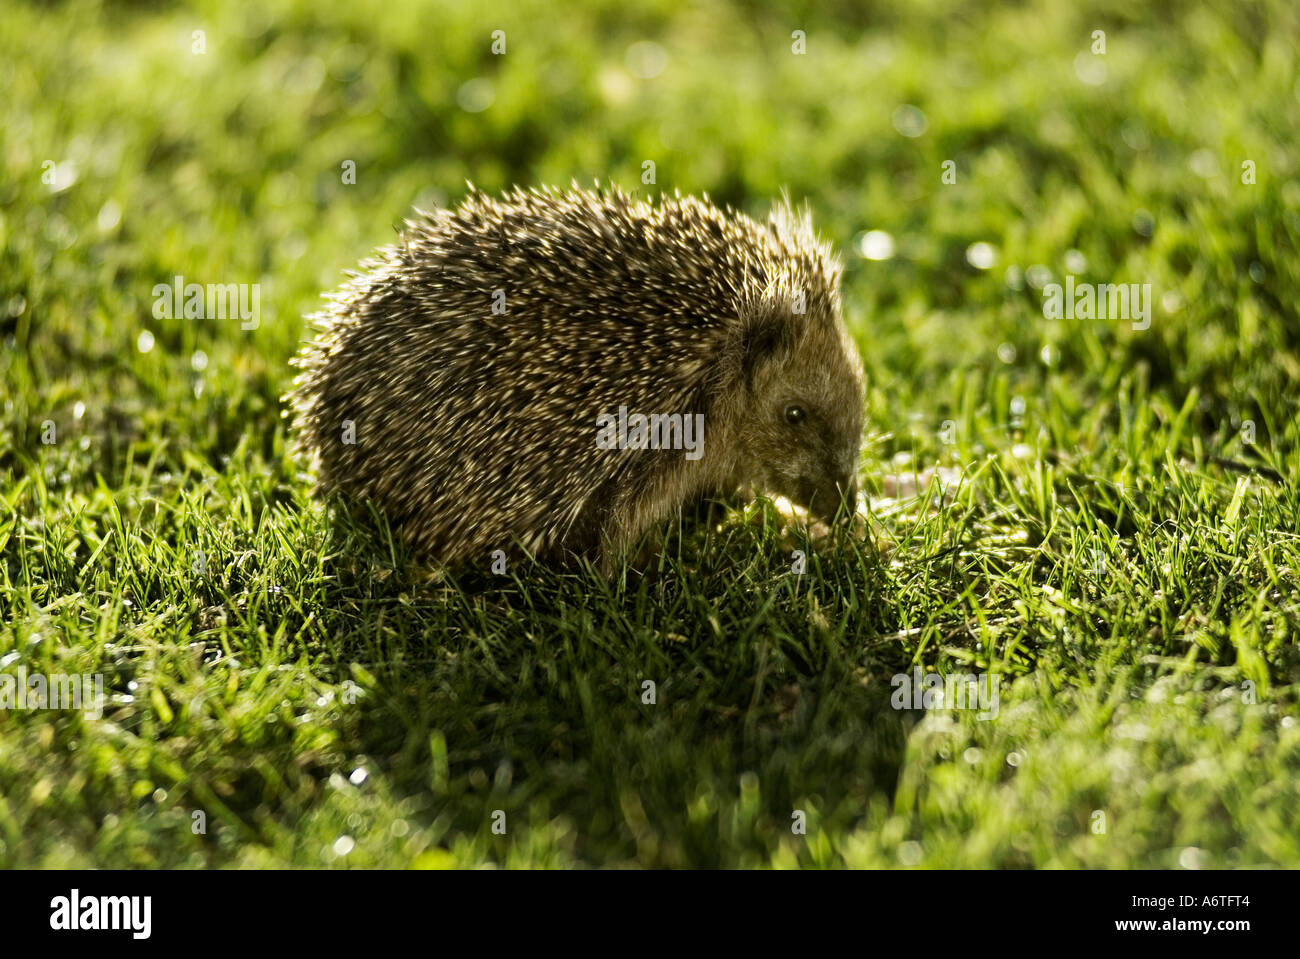 A hedgehog on the lawn Stock Photo